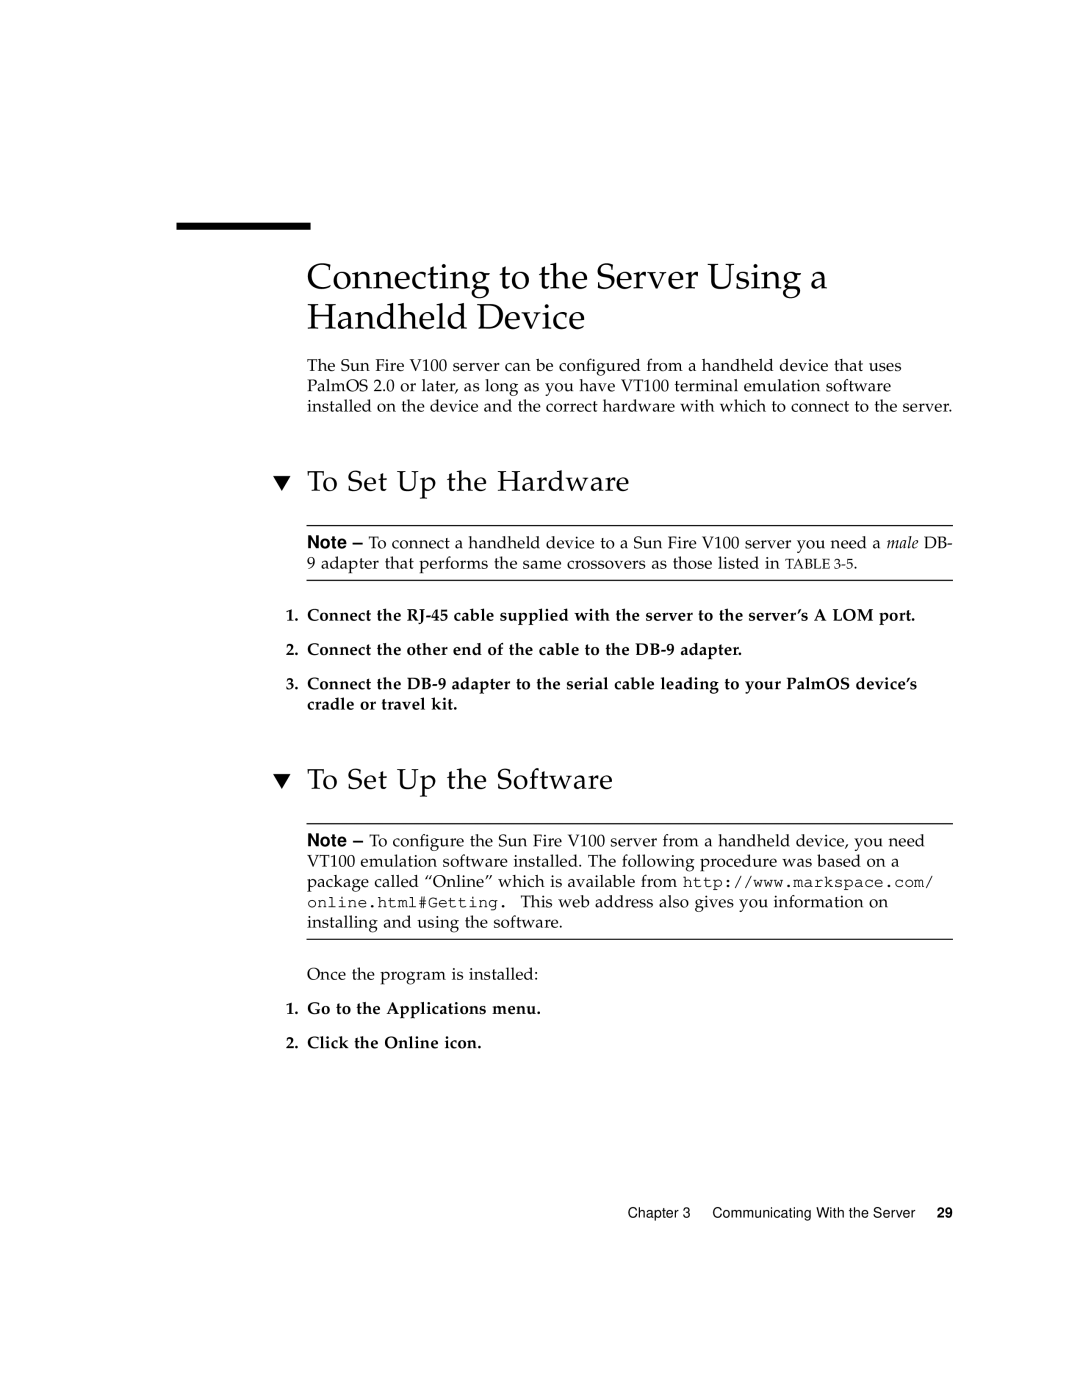 Sun Microsystems Sun Fire V100 manual Connecting to the Server Using a Handheld Device, To Set Up the Hardware 